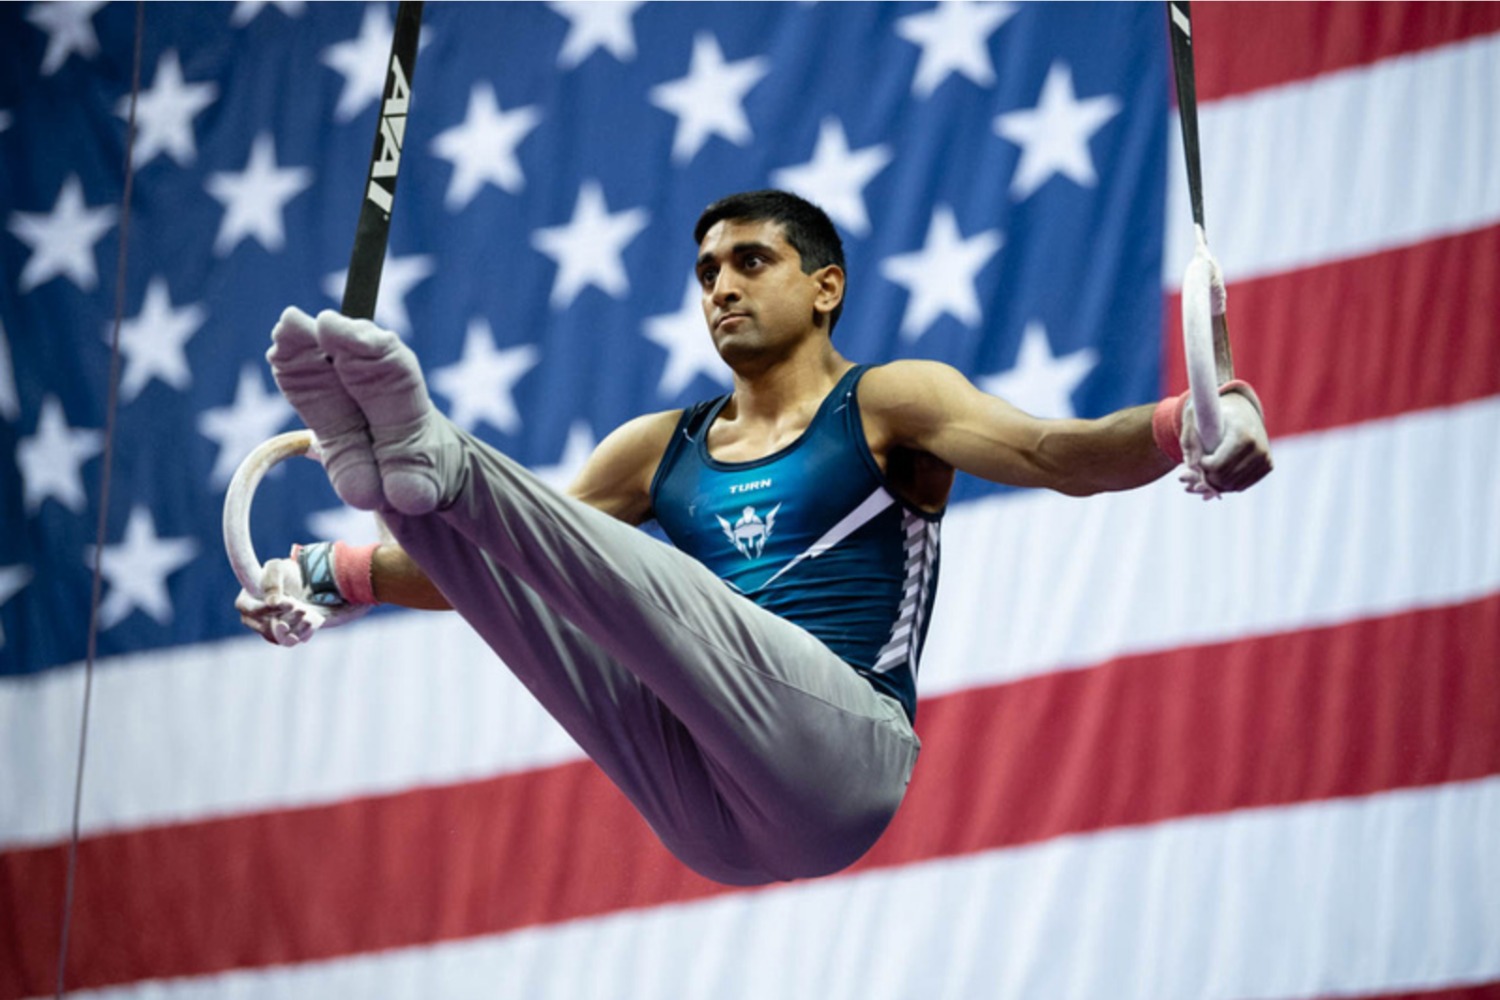 U.S. Gymnastics Championships and more postponed due to COVID-19 pandemic